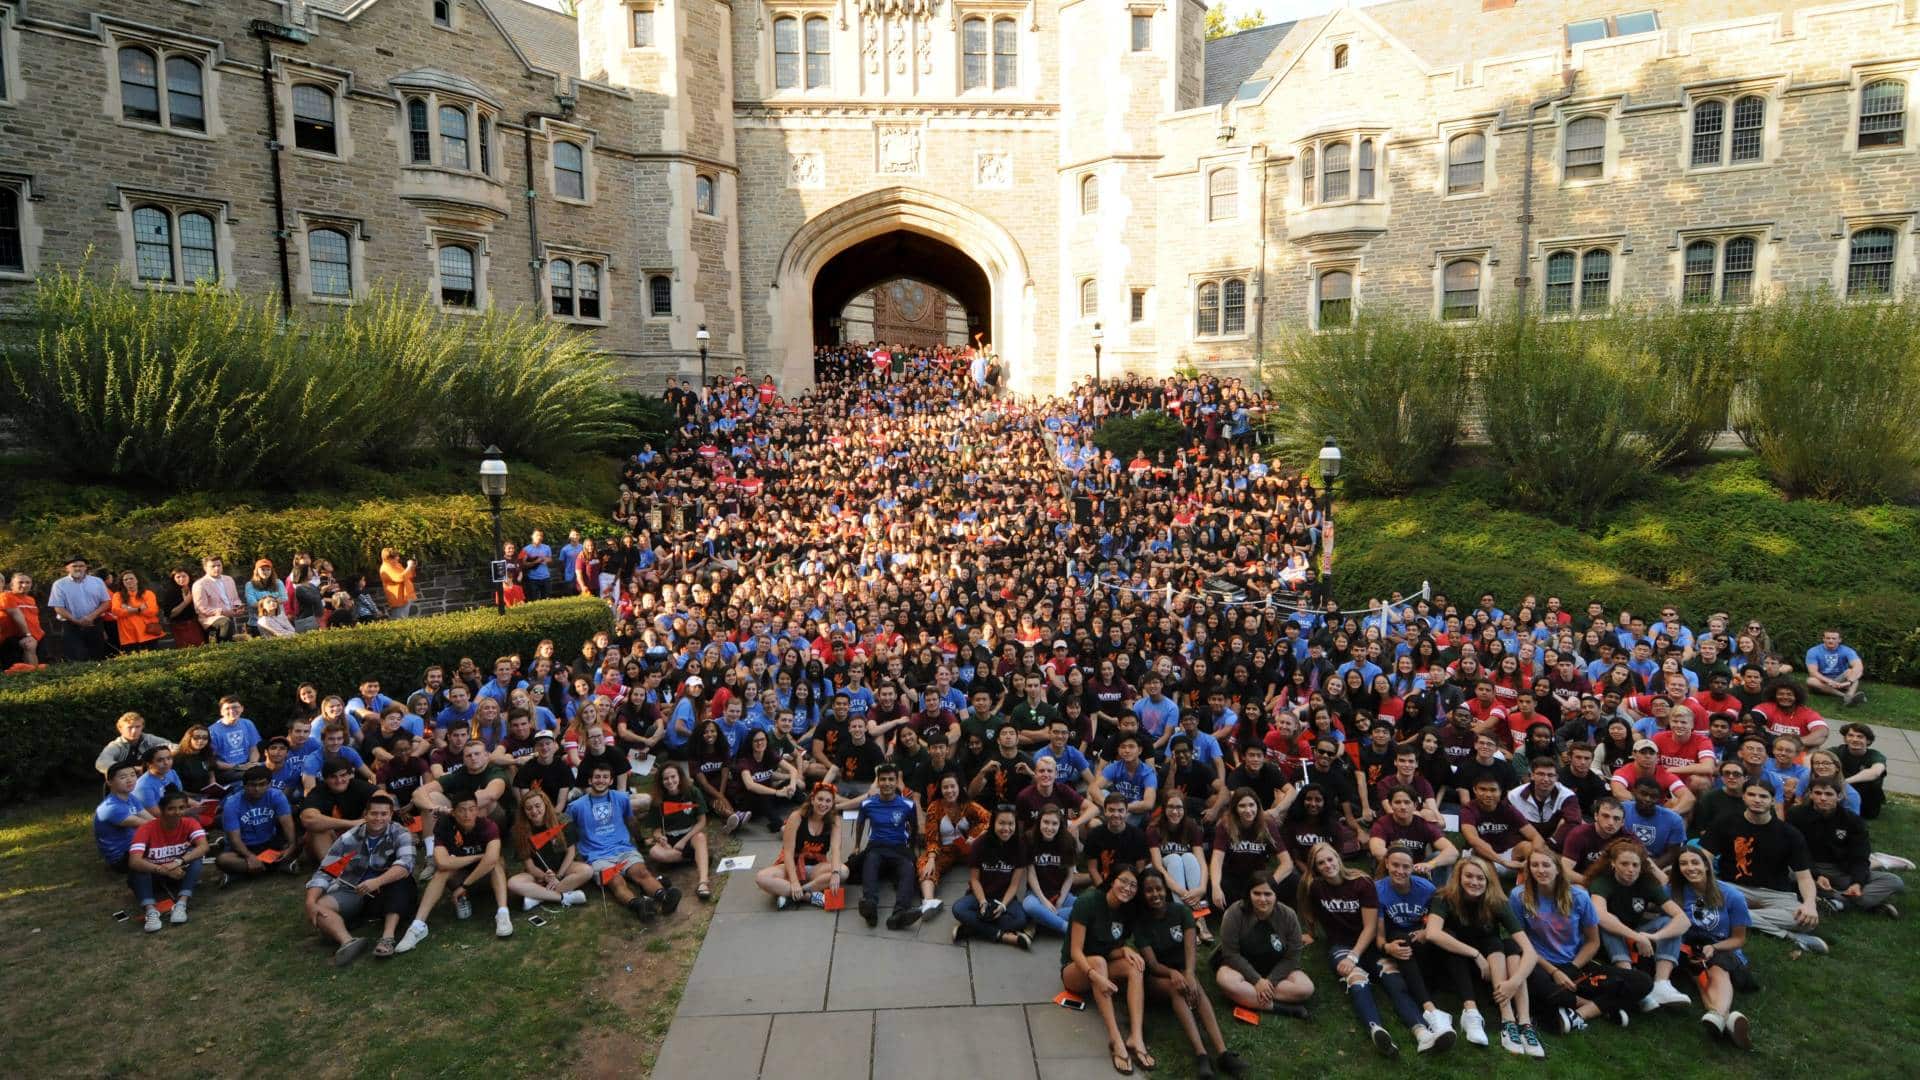 Princeton University Rankings on Forbes, Data and Profile 2022 Update